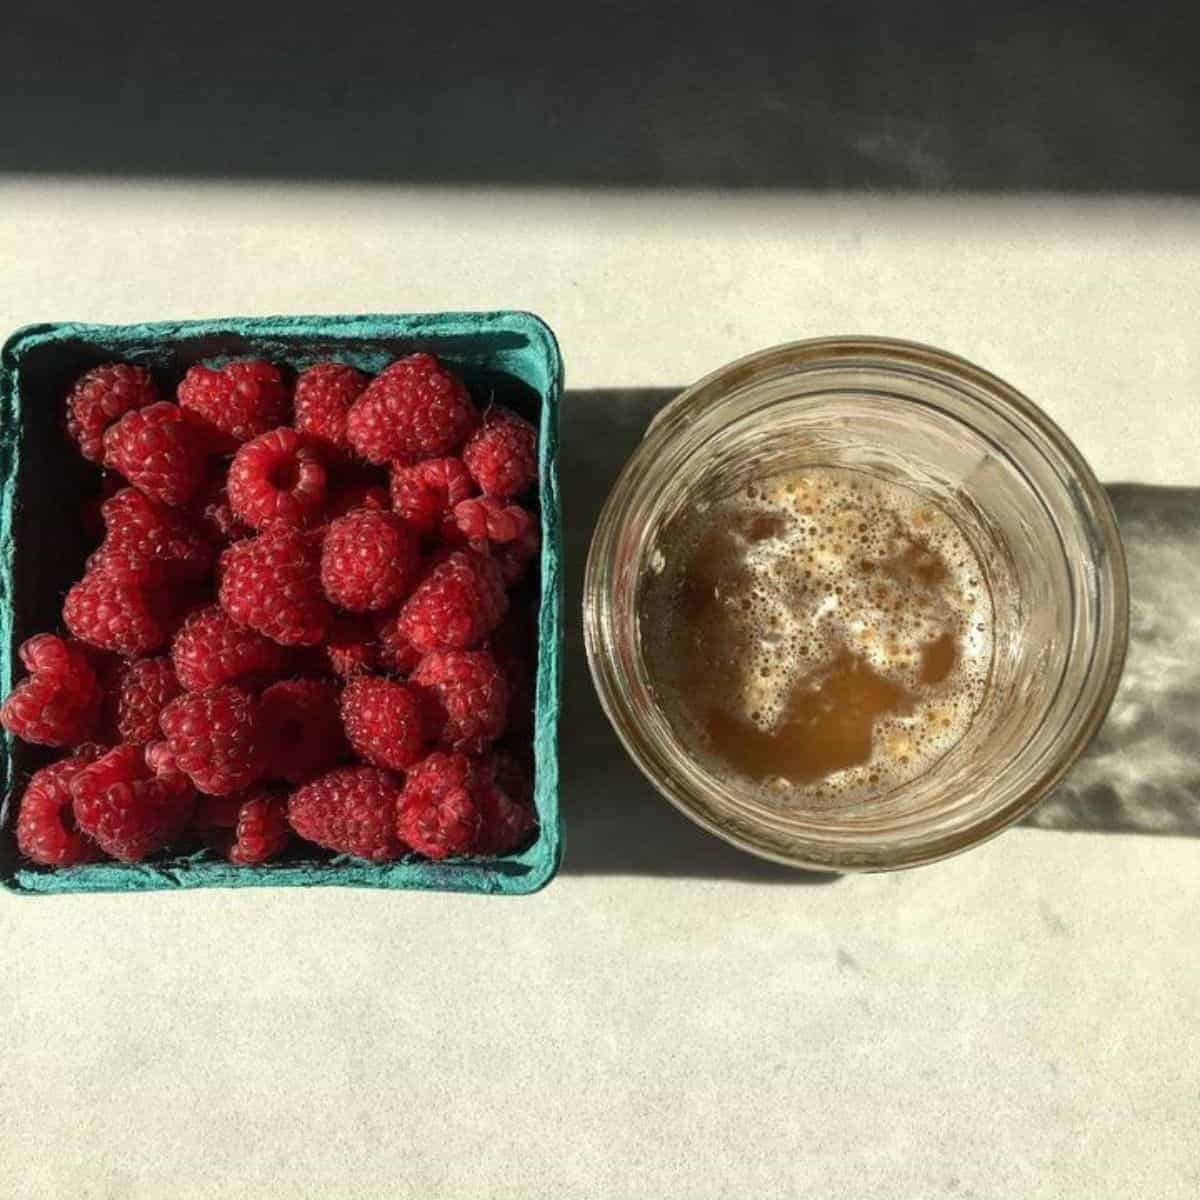 Fresh raspberries and gomme syrup pairing